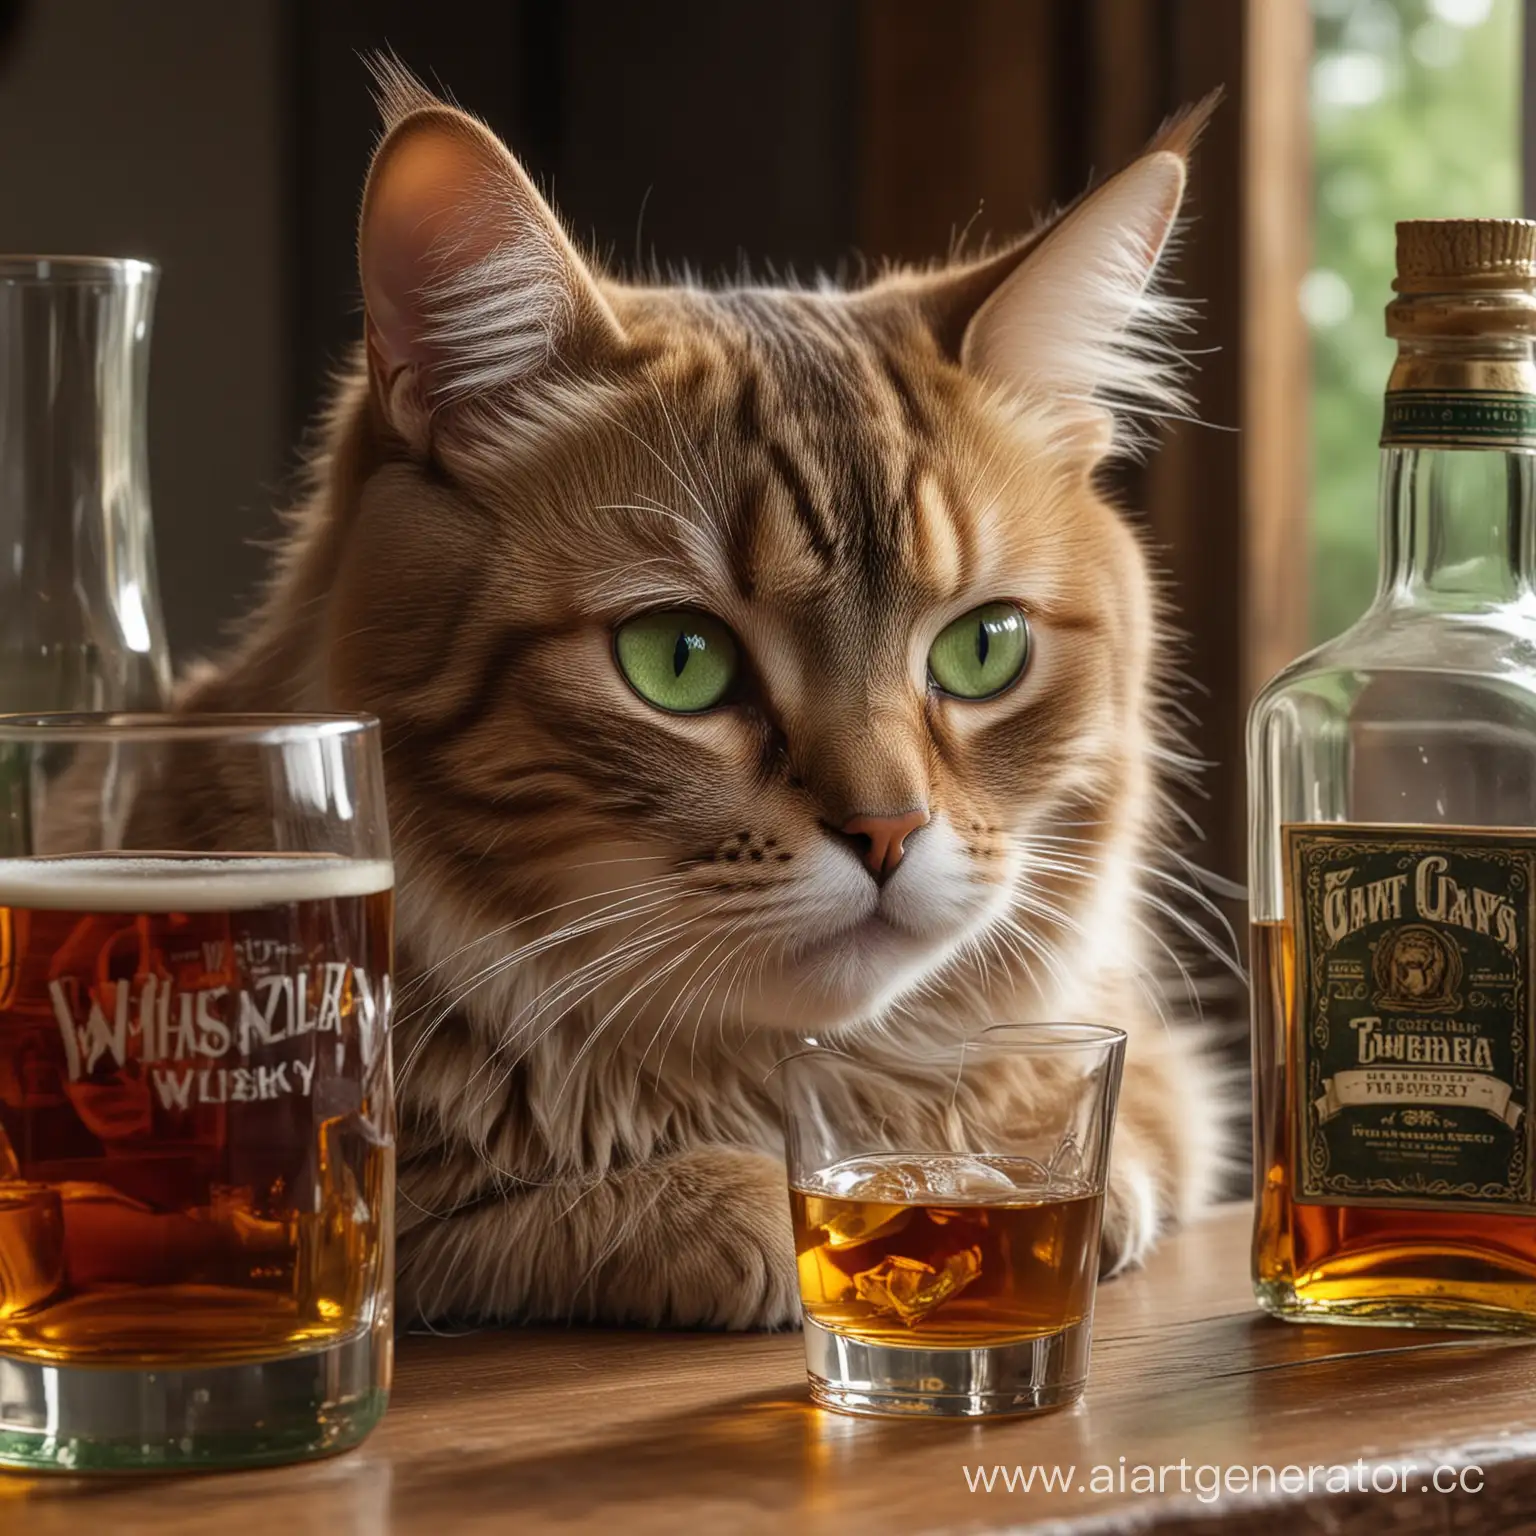 Pensive-GreenEyed-Cat-Surrounded-by-Whiskey-Bottles